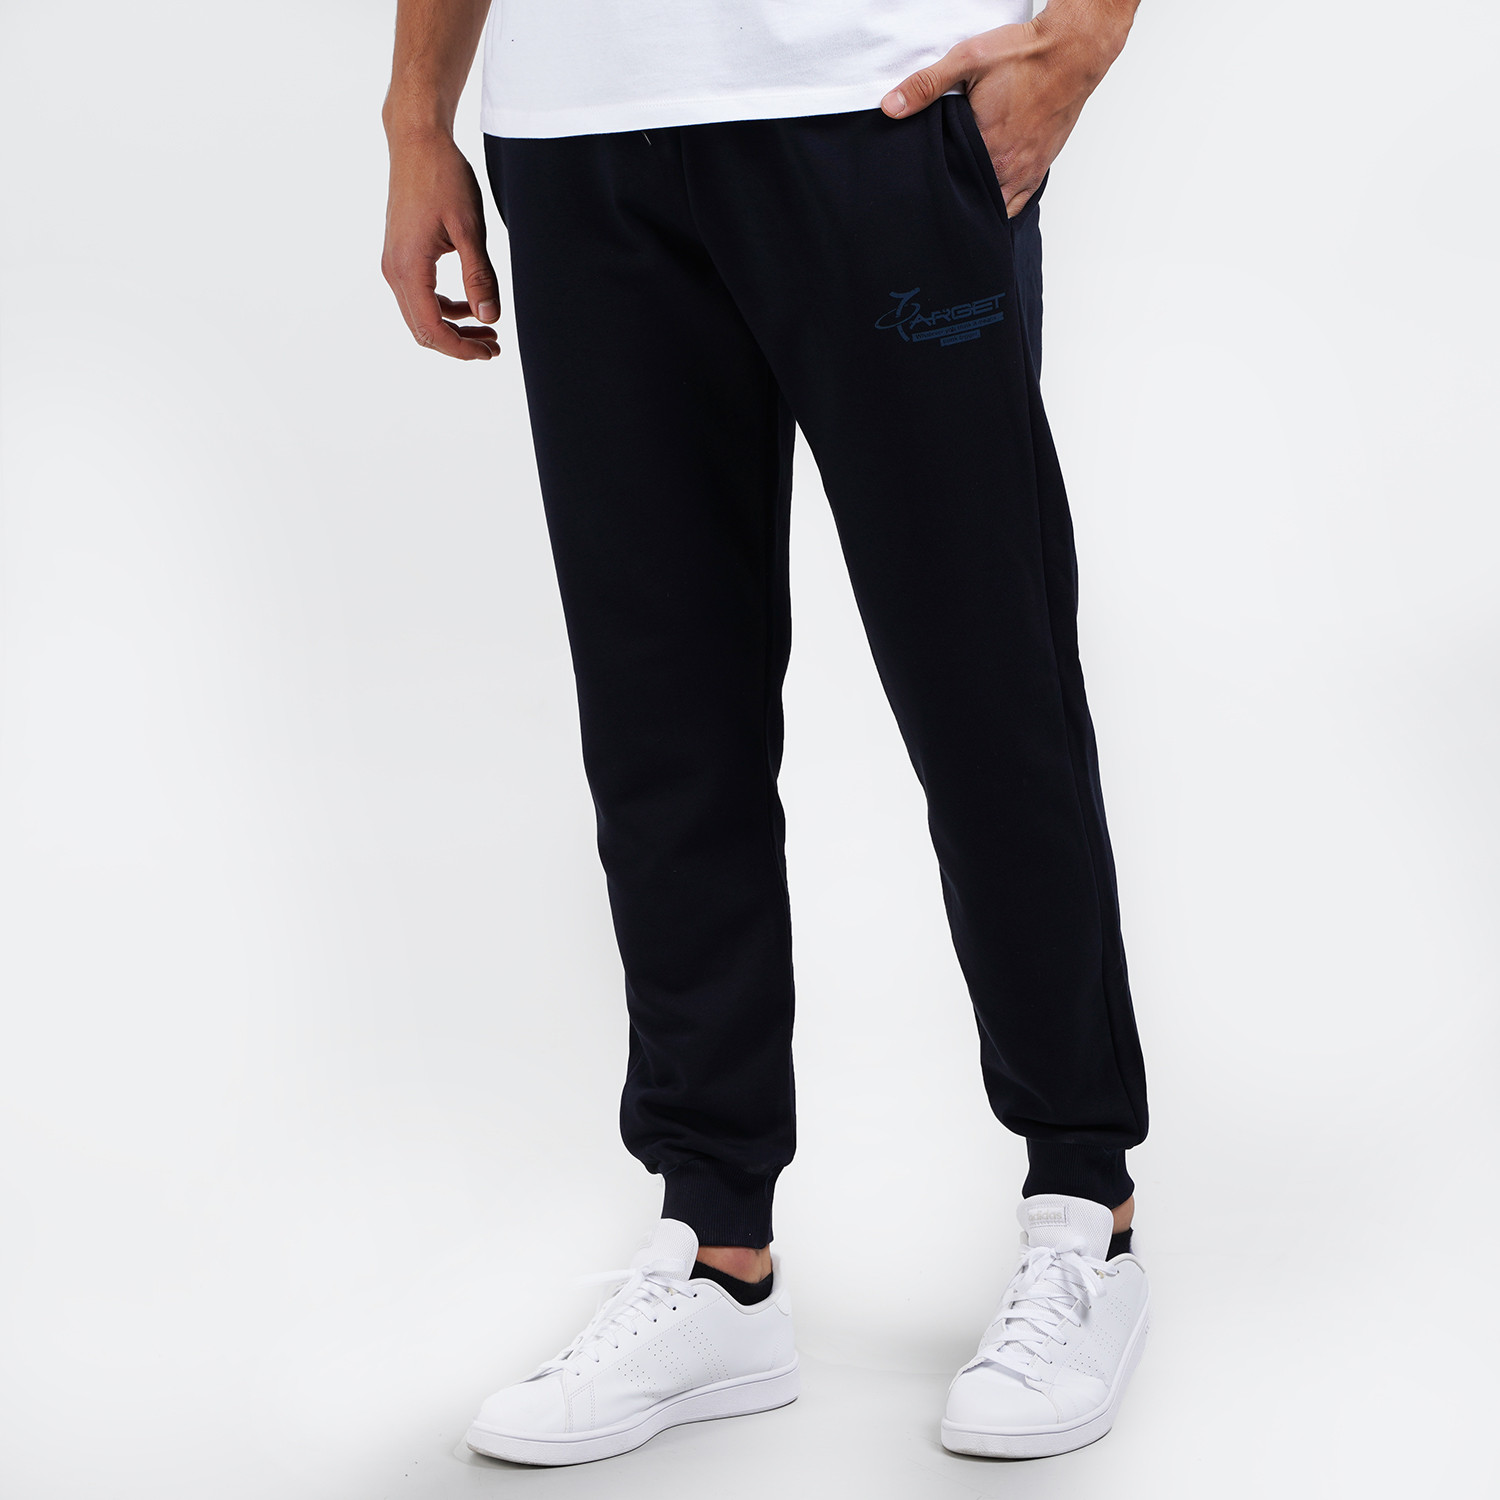 Target Cuff Pants Frenchterry 